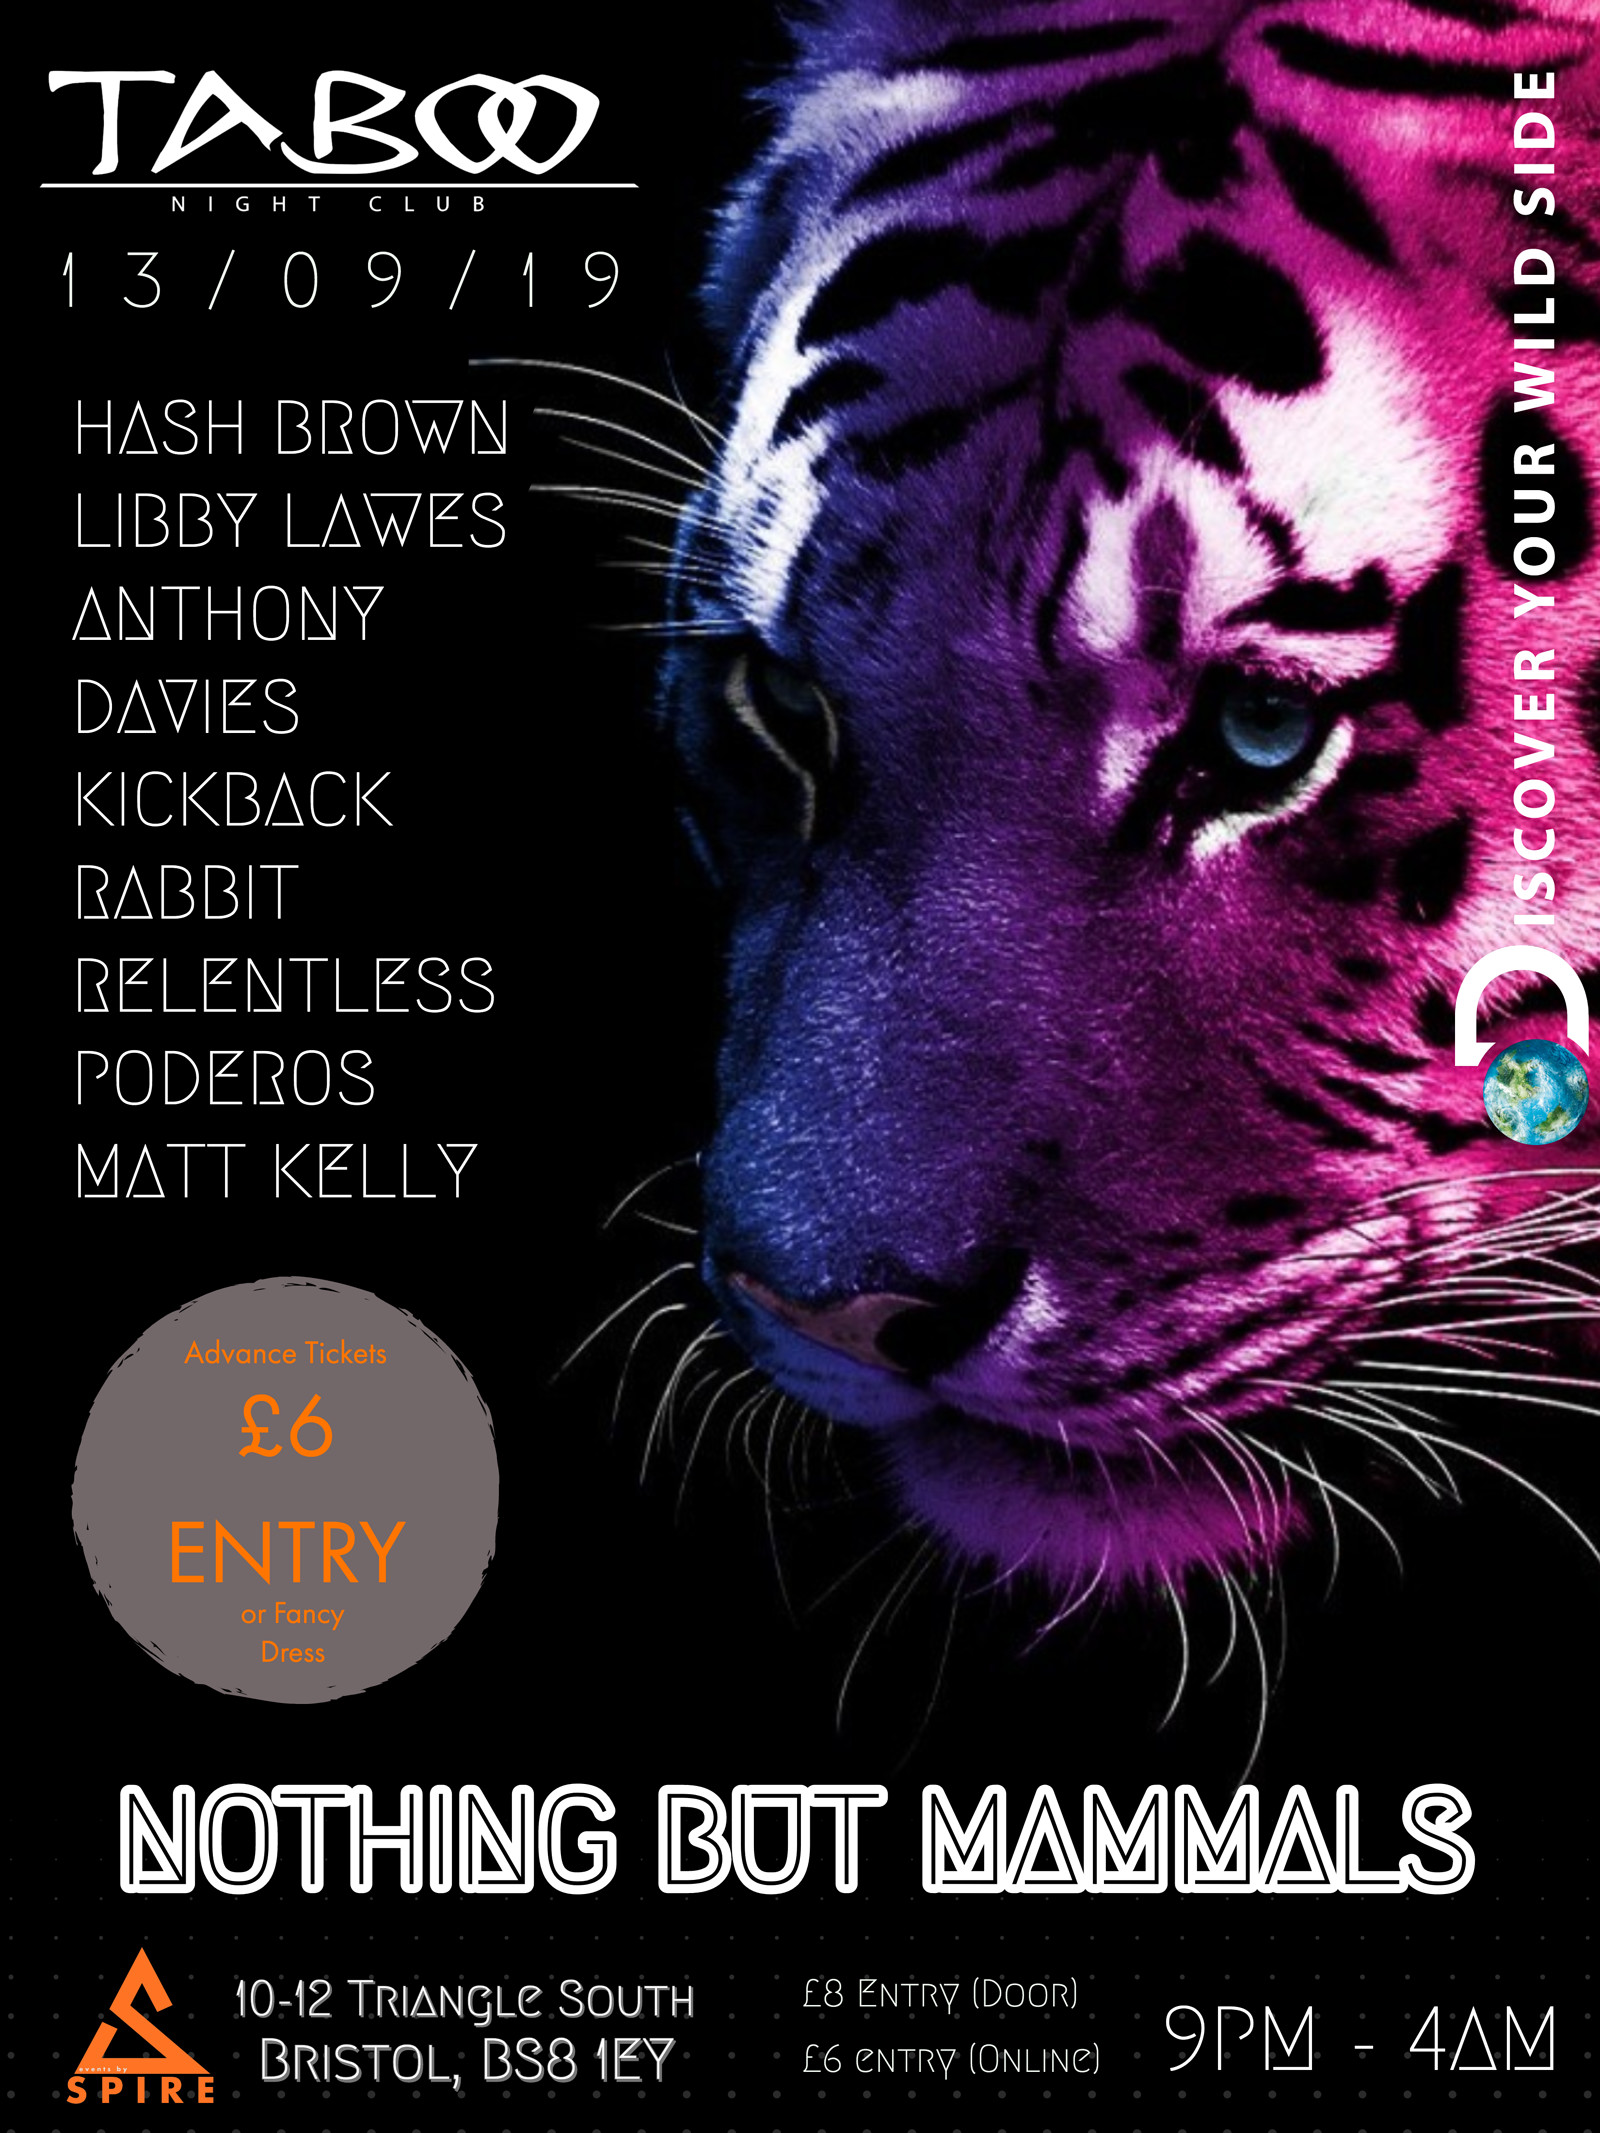 SPIRE presents: Nothing But Mammals @ Taboo at Taboo Nightclub